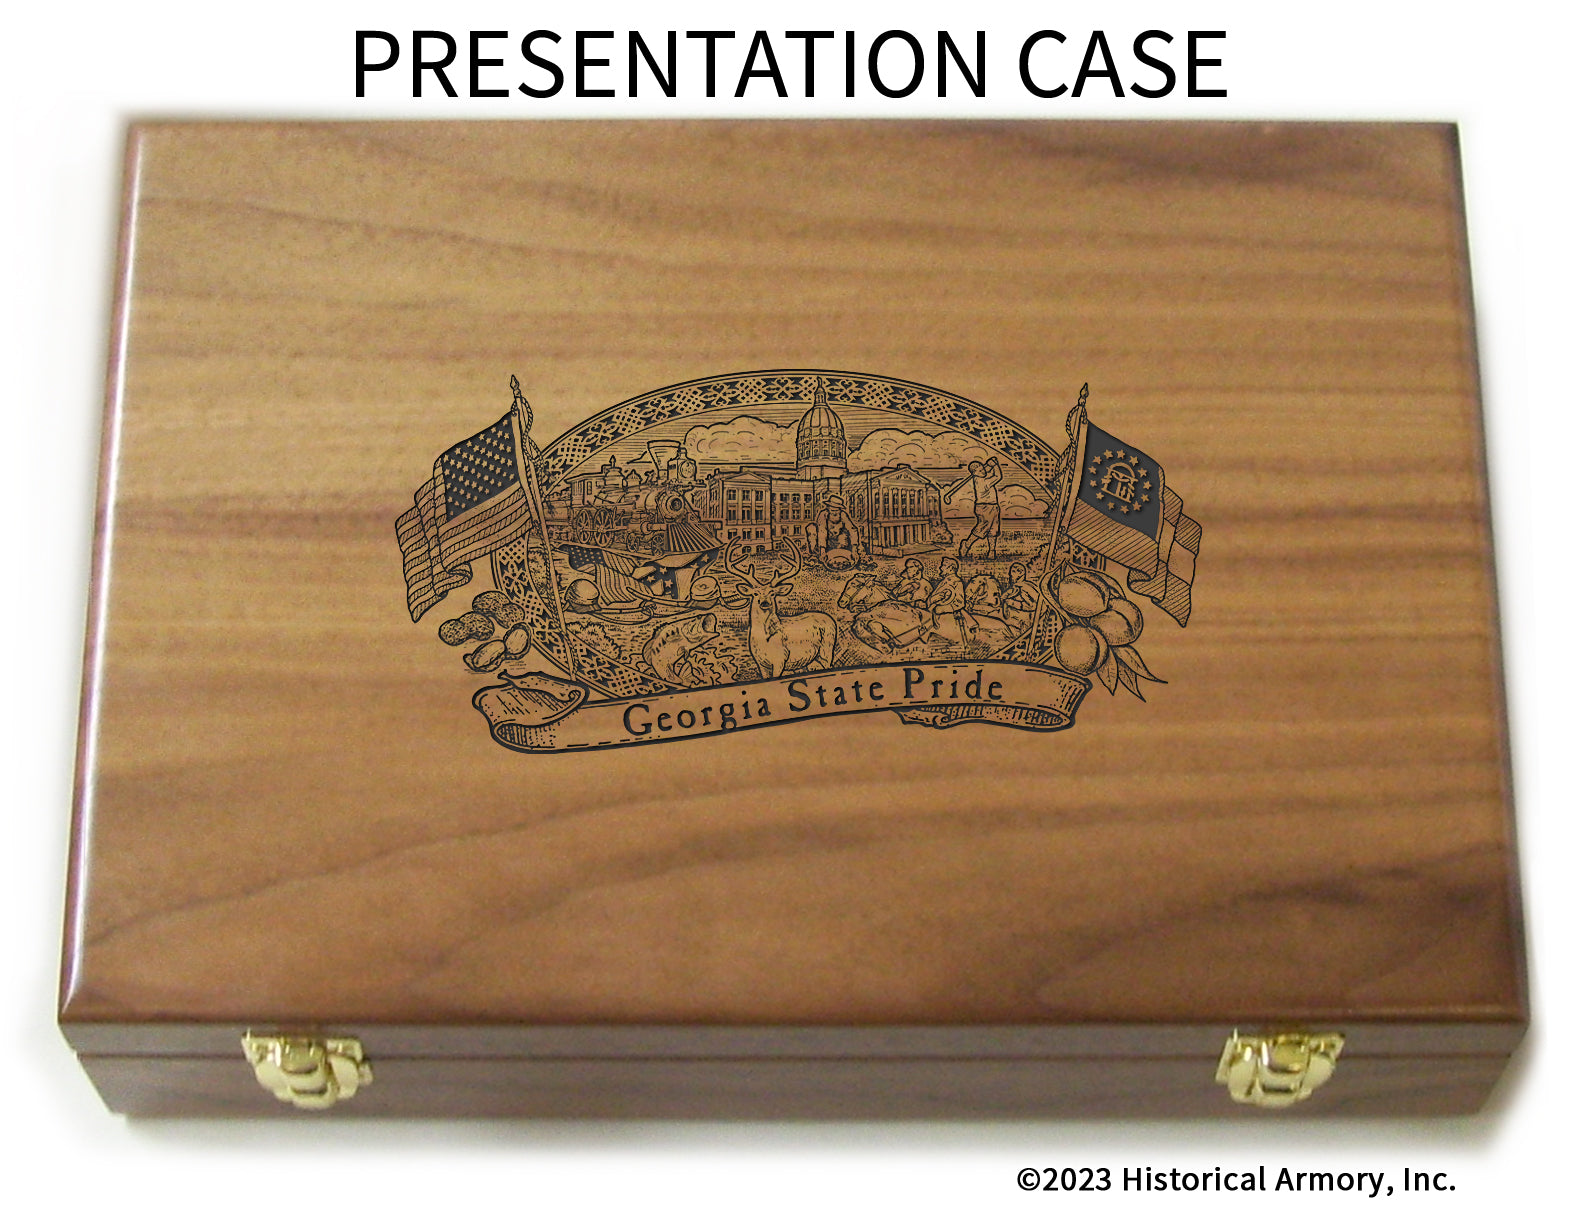 Georgia State Pride Limited Edition Engraved 1911 Presentation Case